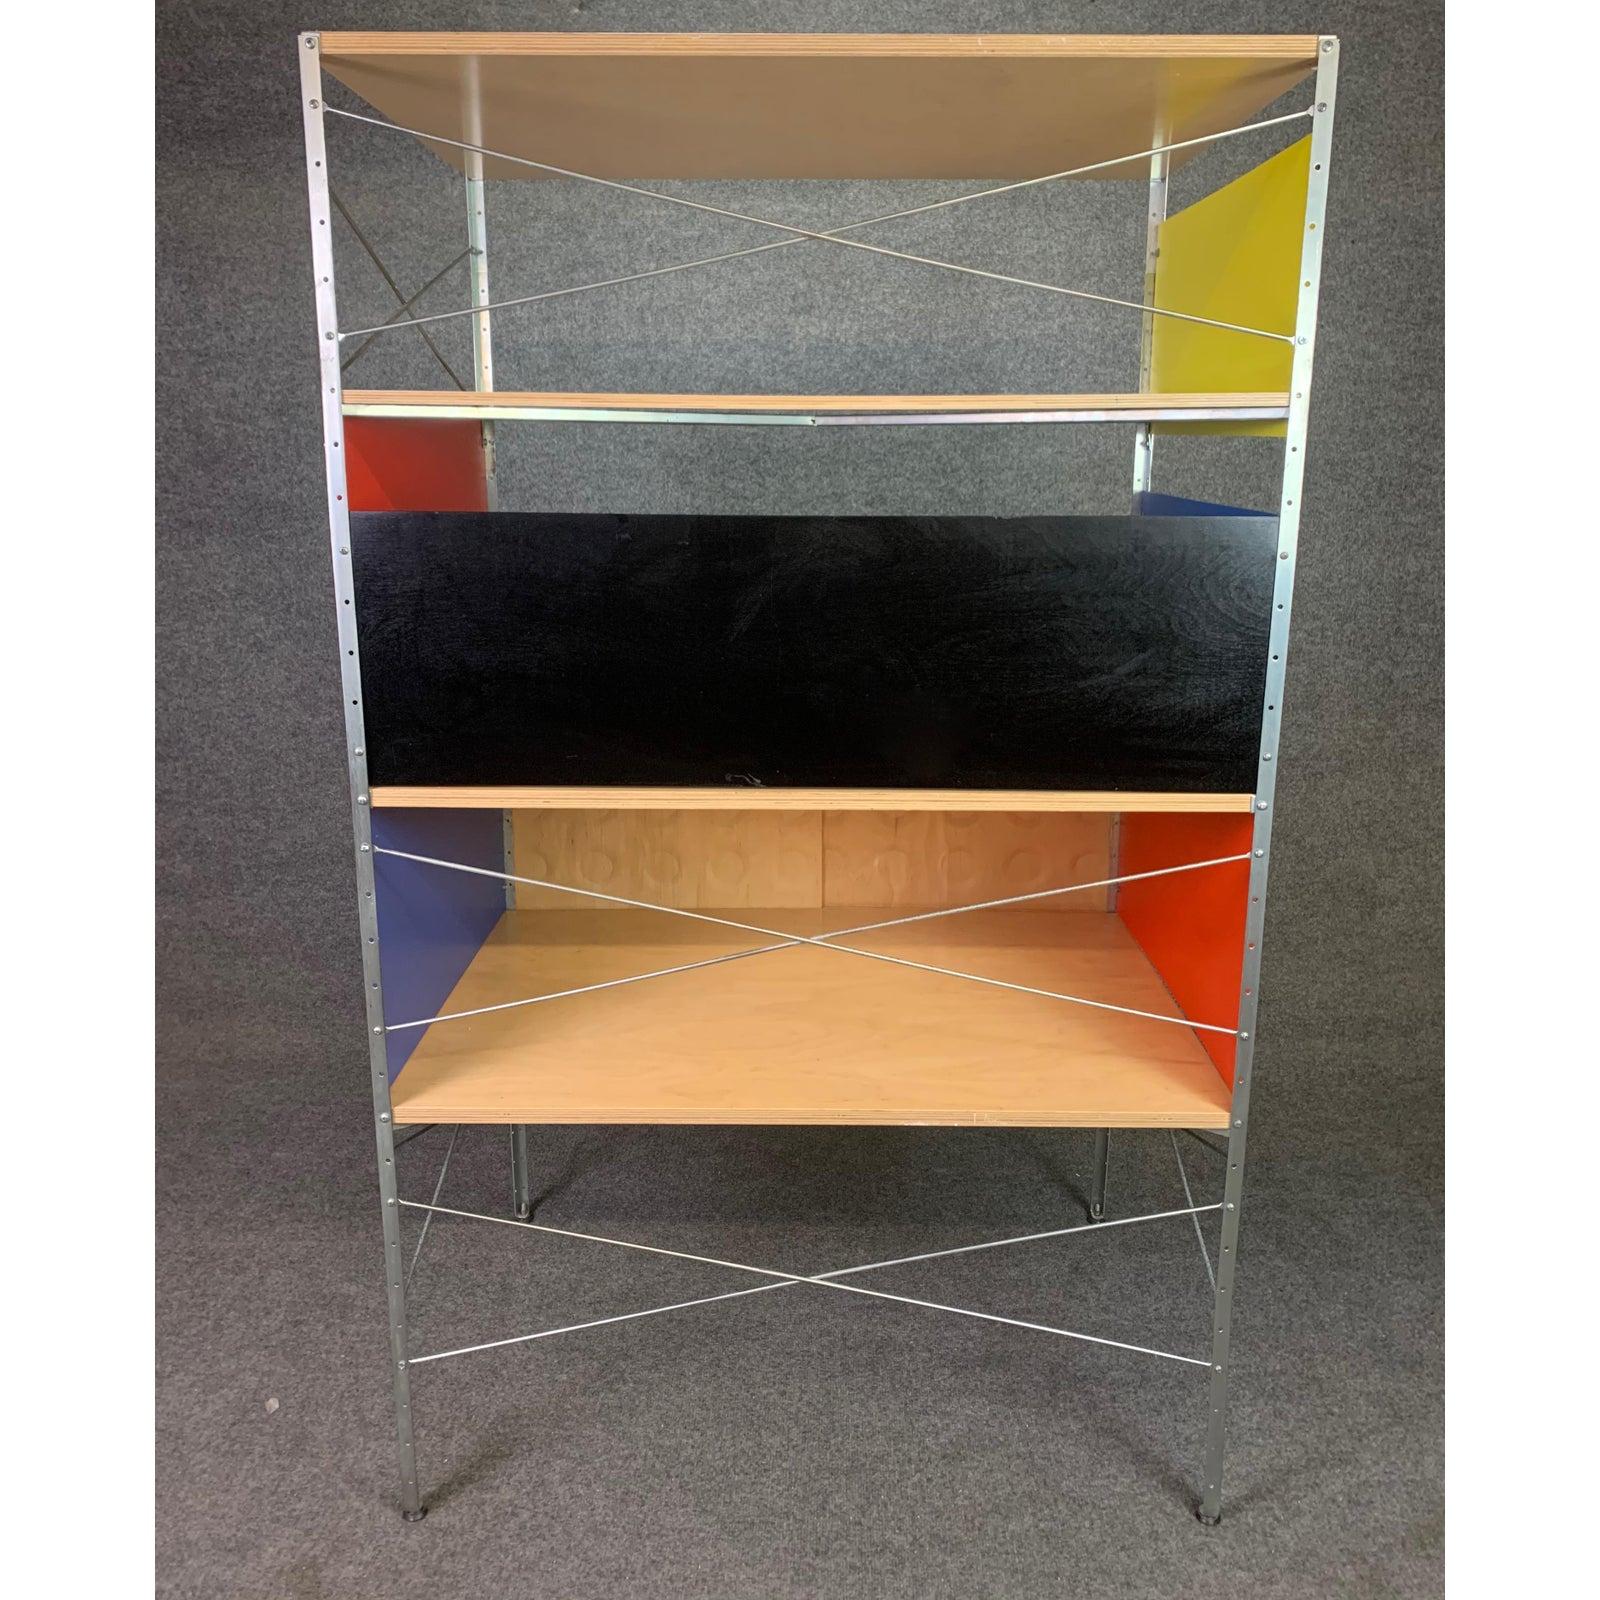 Vintage Mid-Century Modern Eames Style Esu Storage Unit by Modernica In Good Condition In San Marcos, CA